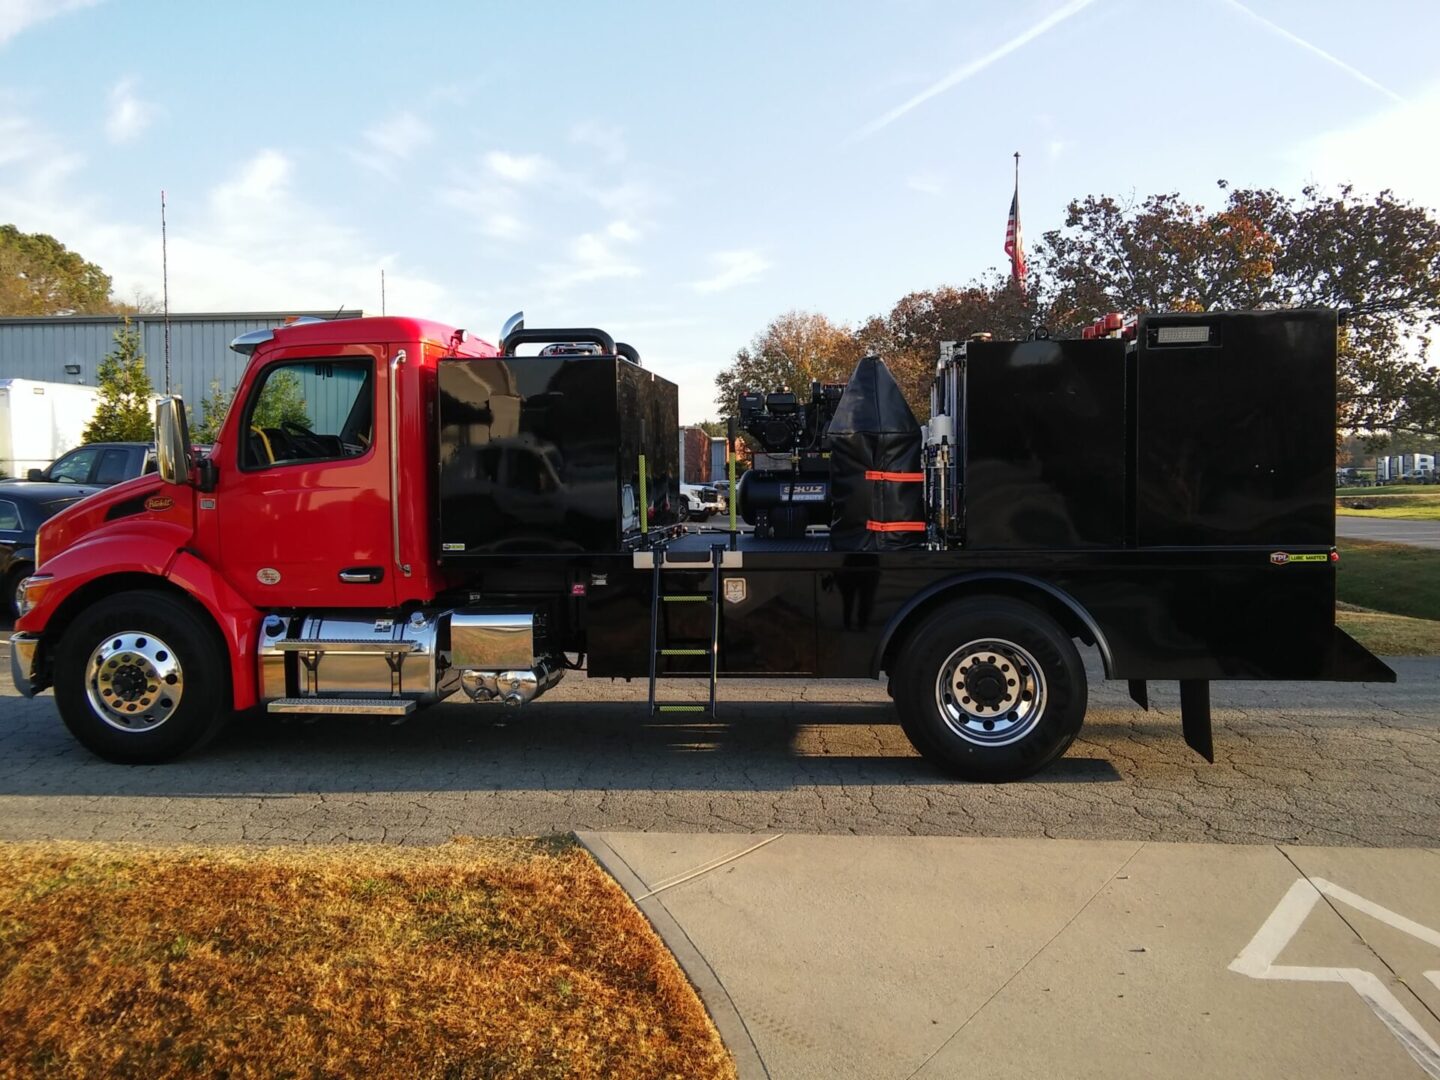 A red truck with a black trailer parked on the side of the road.